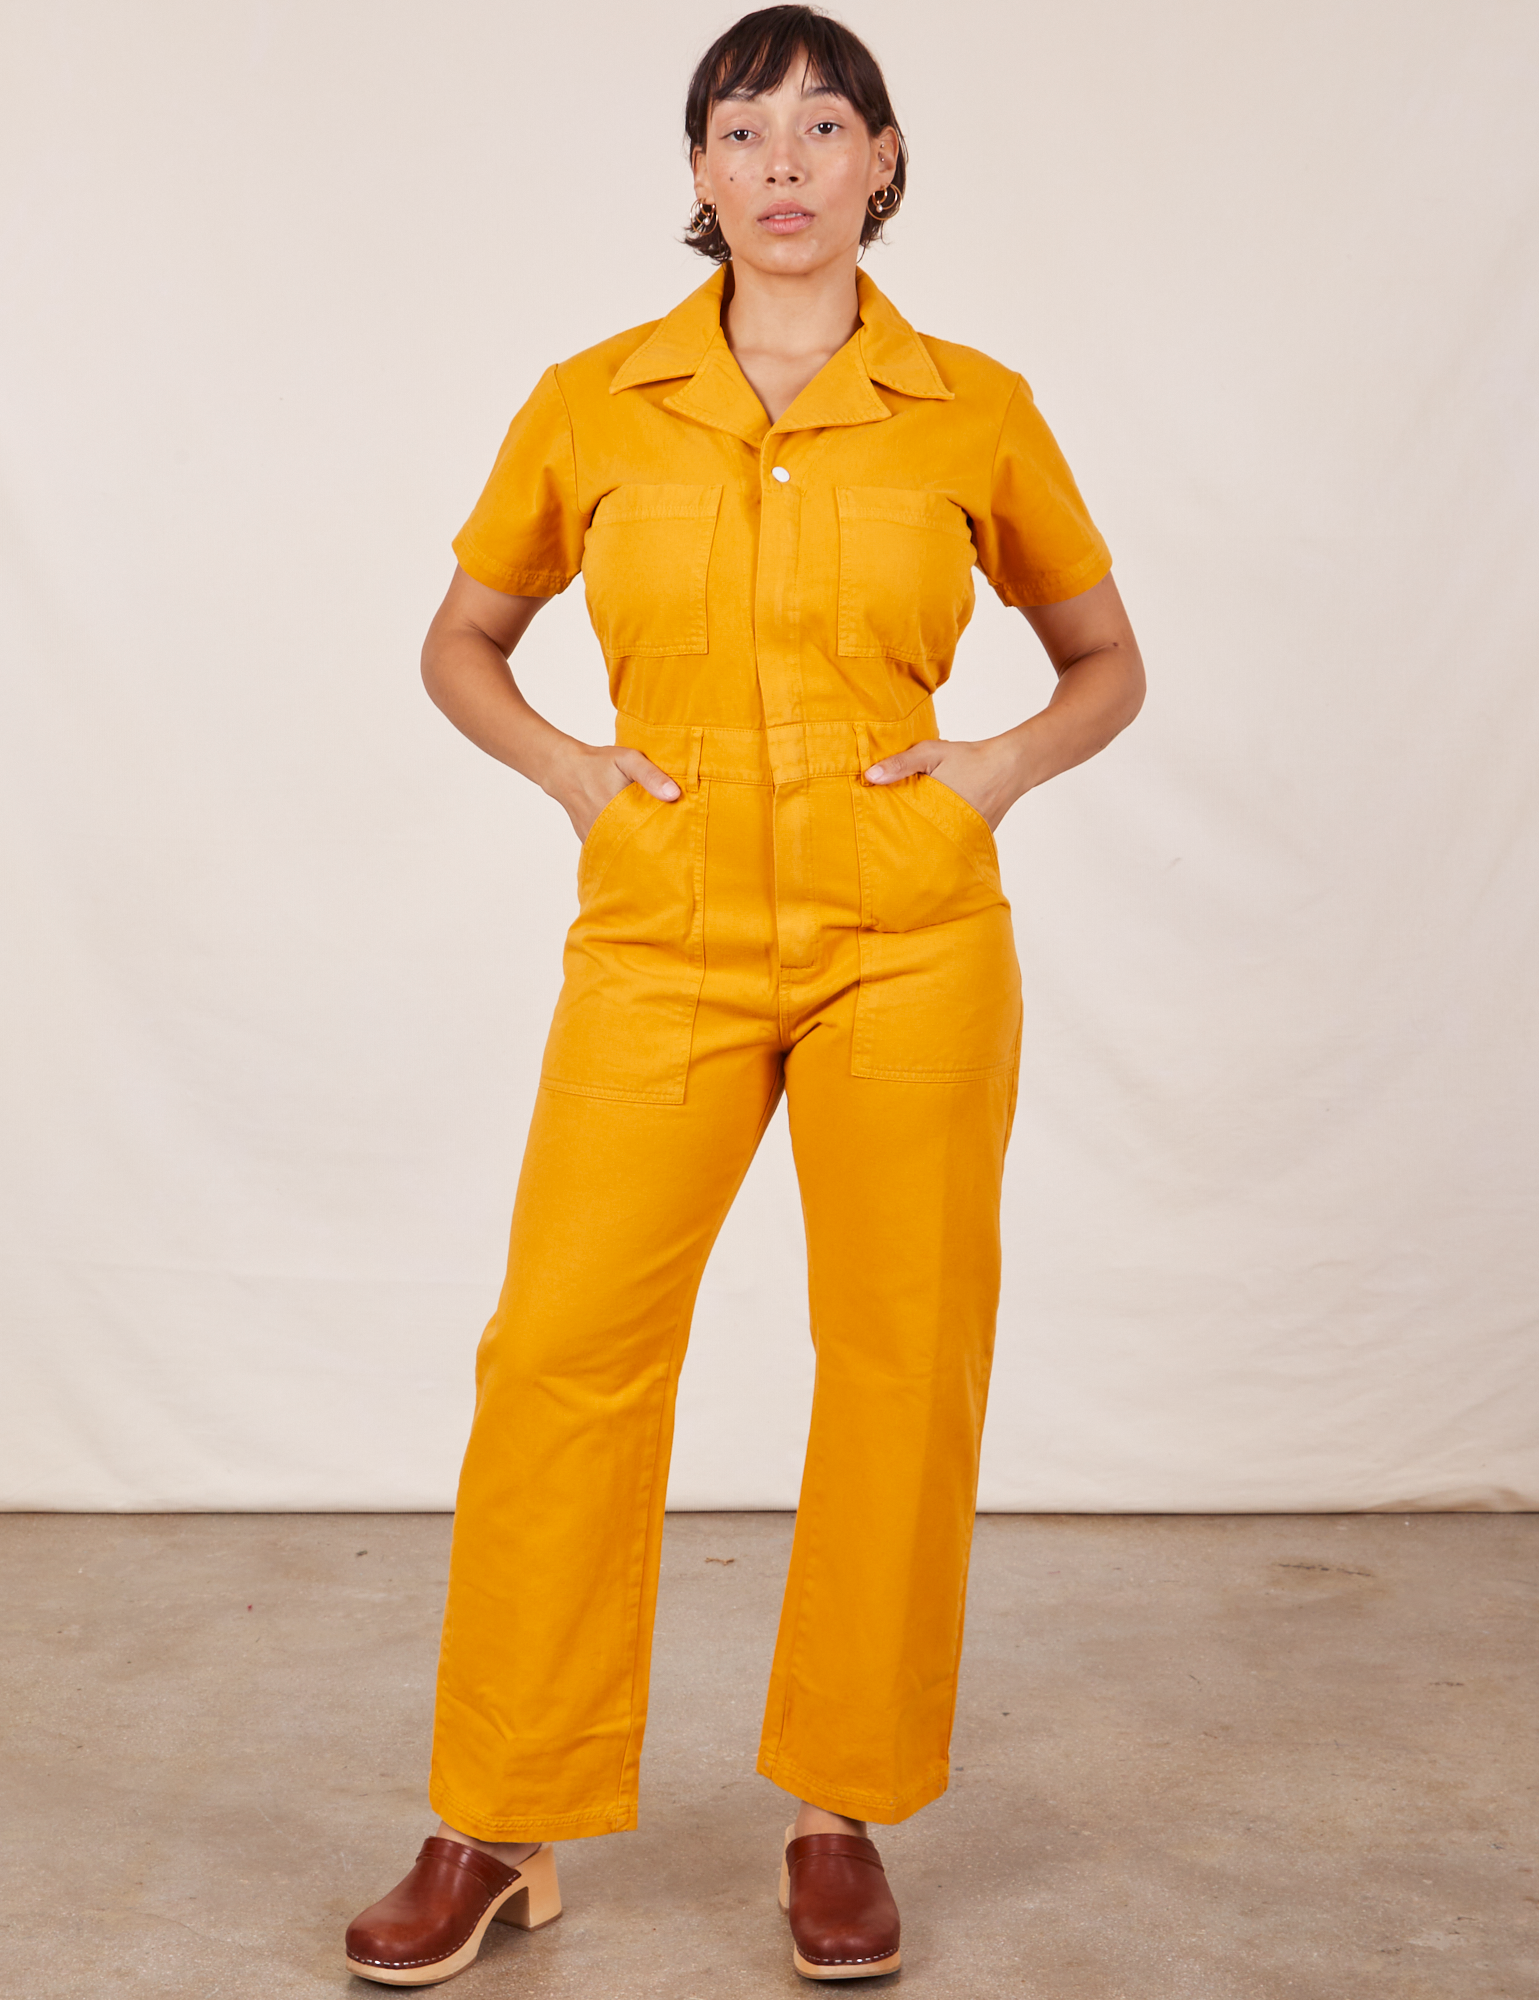 Tiara is 5&#39;4&quot; and wearing S Short Sleeve Jumpsuit in Mustard Yellow